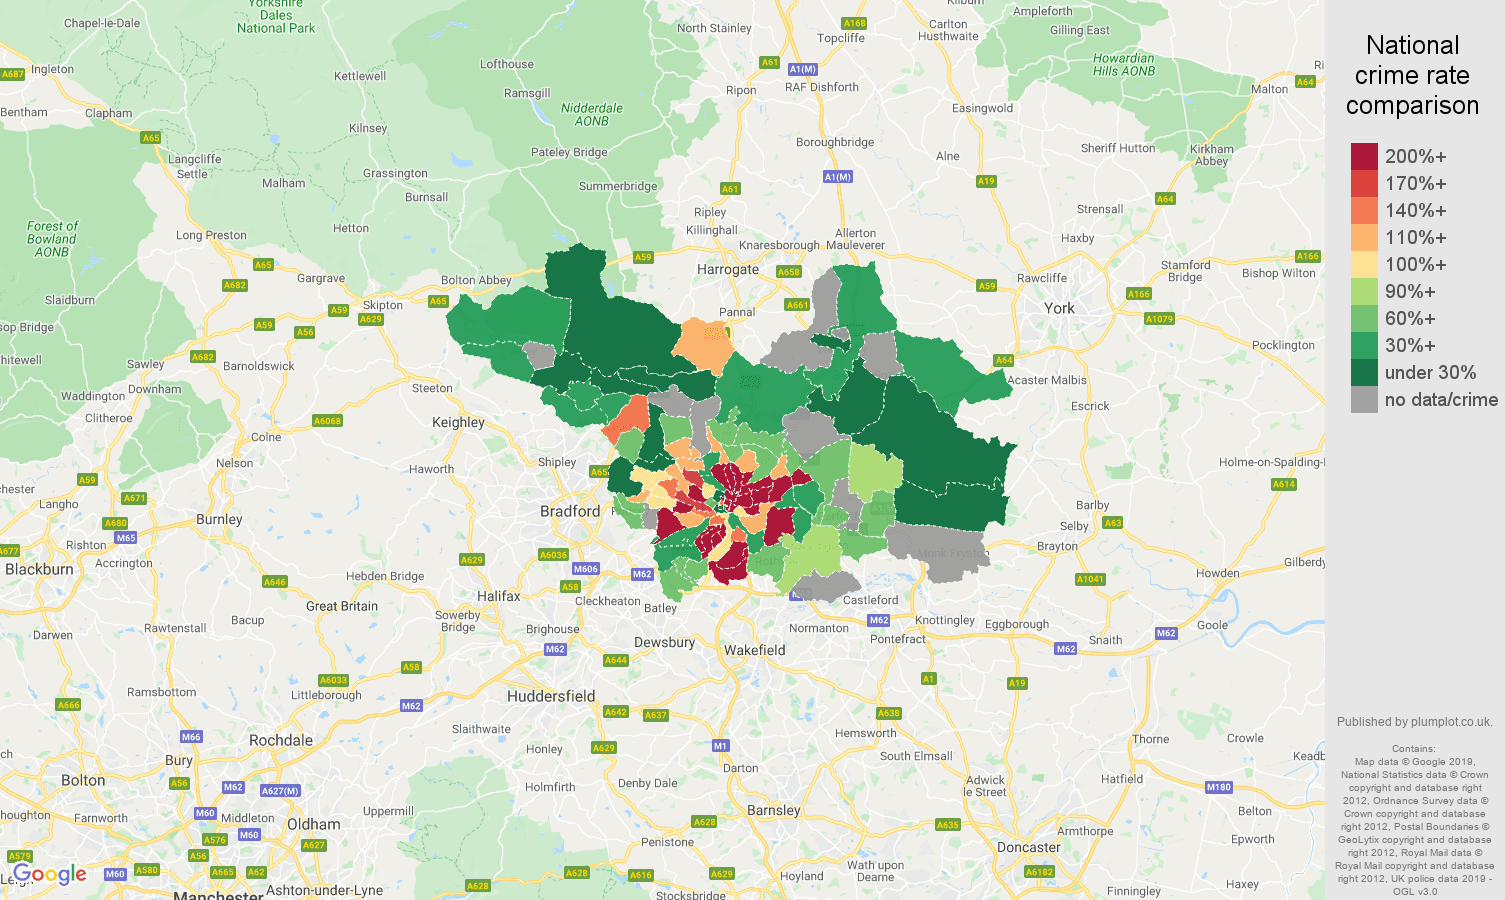 Leeds possession of weapons crime rate comparison map